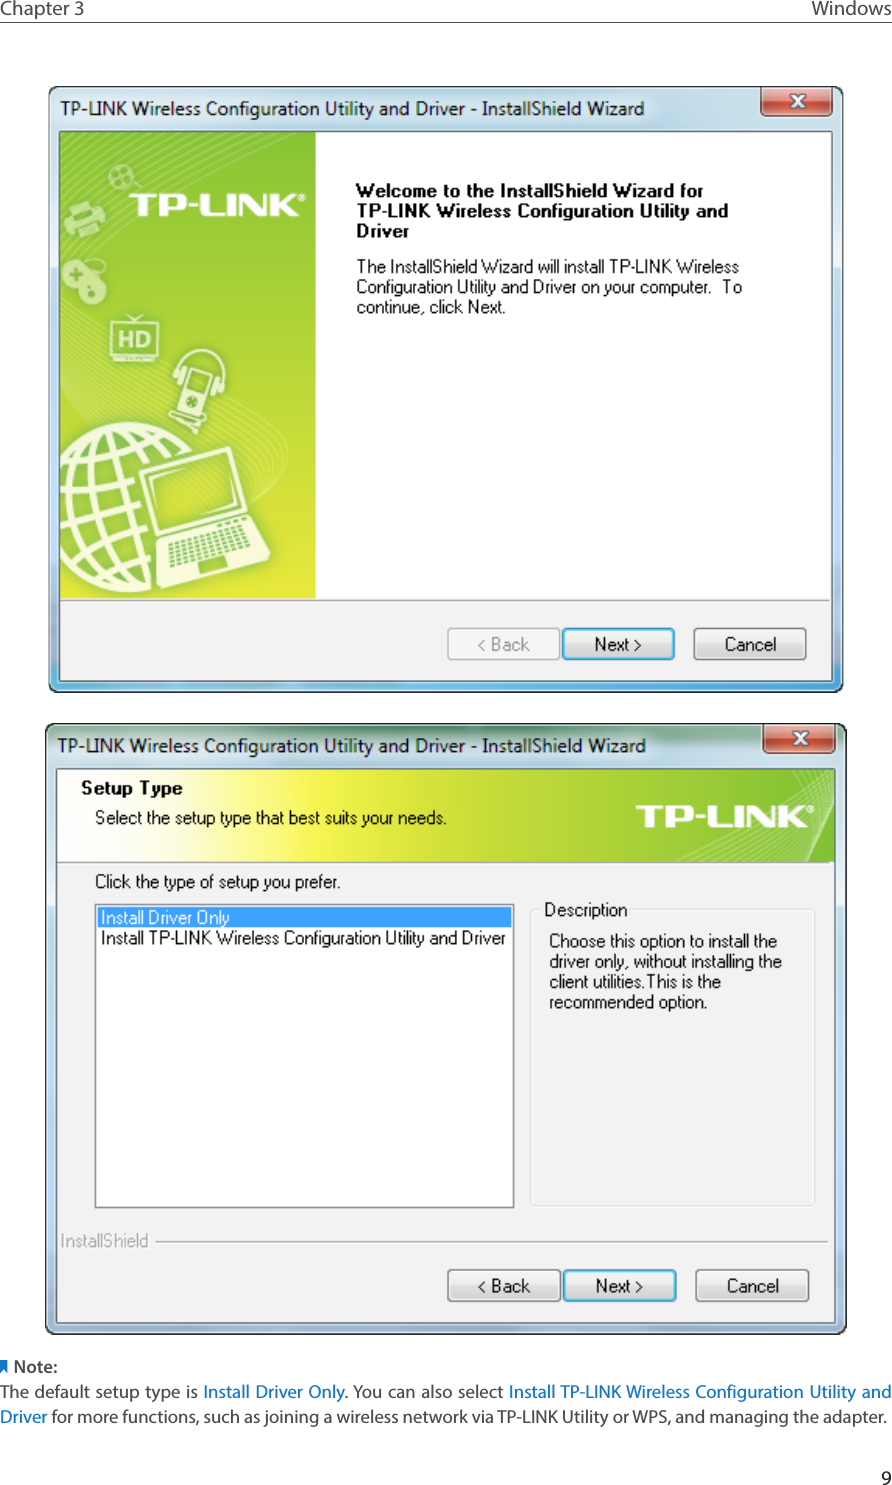 9Chapter 3 WindowsNote:The default setup type is Install Driver Only. You can also select Install TP-LINK Wireless Configuration Utility and Driver for more functions, such as joining a wireless network via TP-LINK Utility or WPS, and managing the adapter.